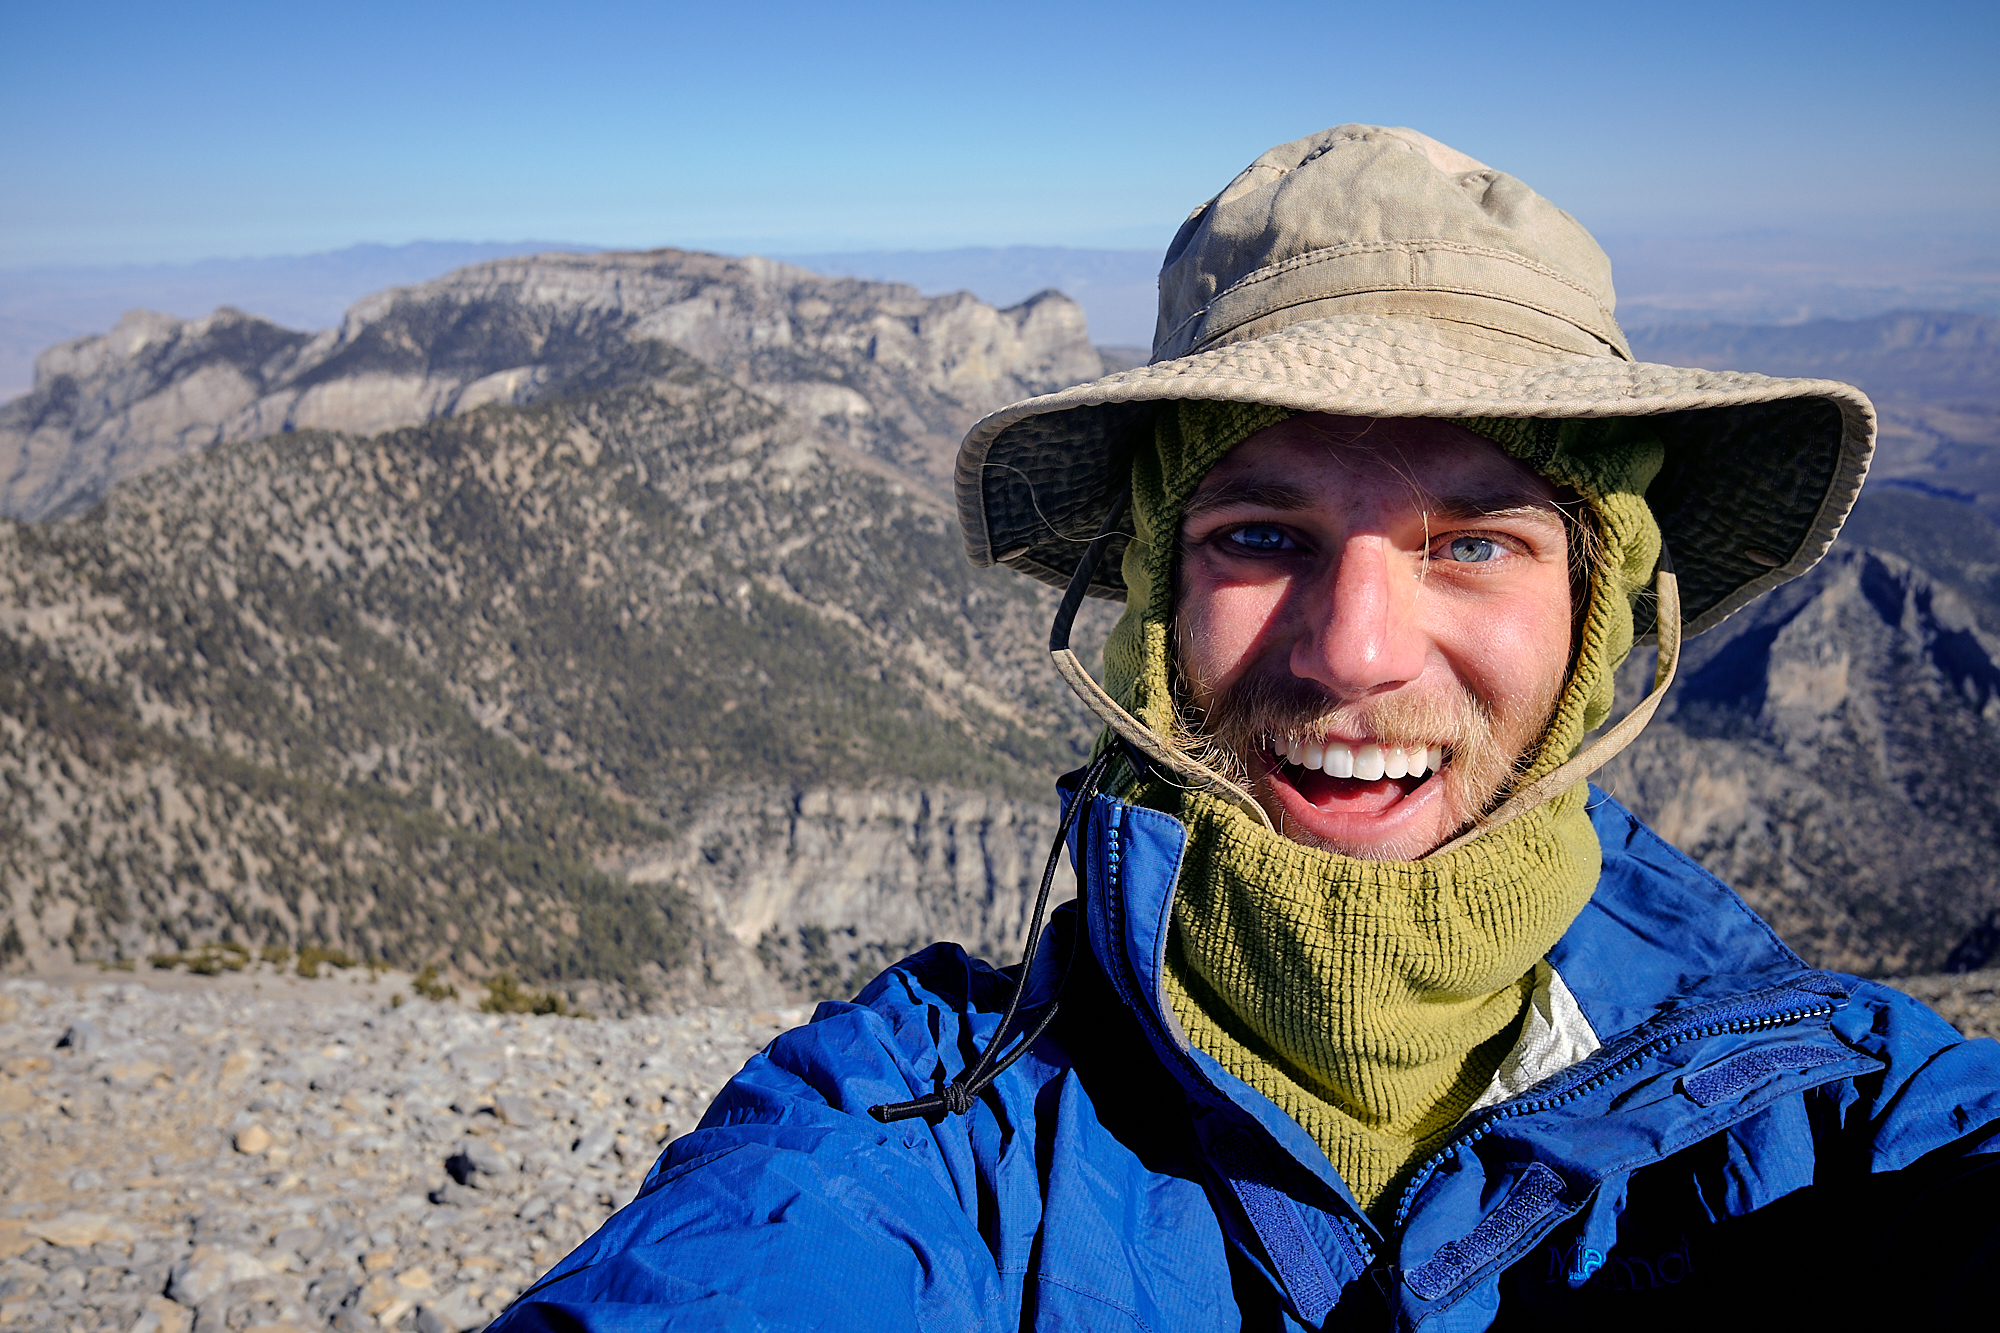  A bundled up selfie on the summit of Mt. Charleston, the most prominent mountain in the state of Nevada. | Mt. Charelston, NV 11/9/18 